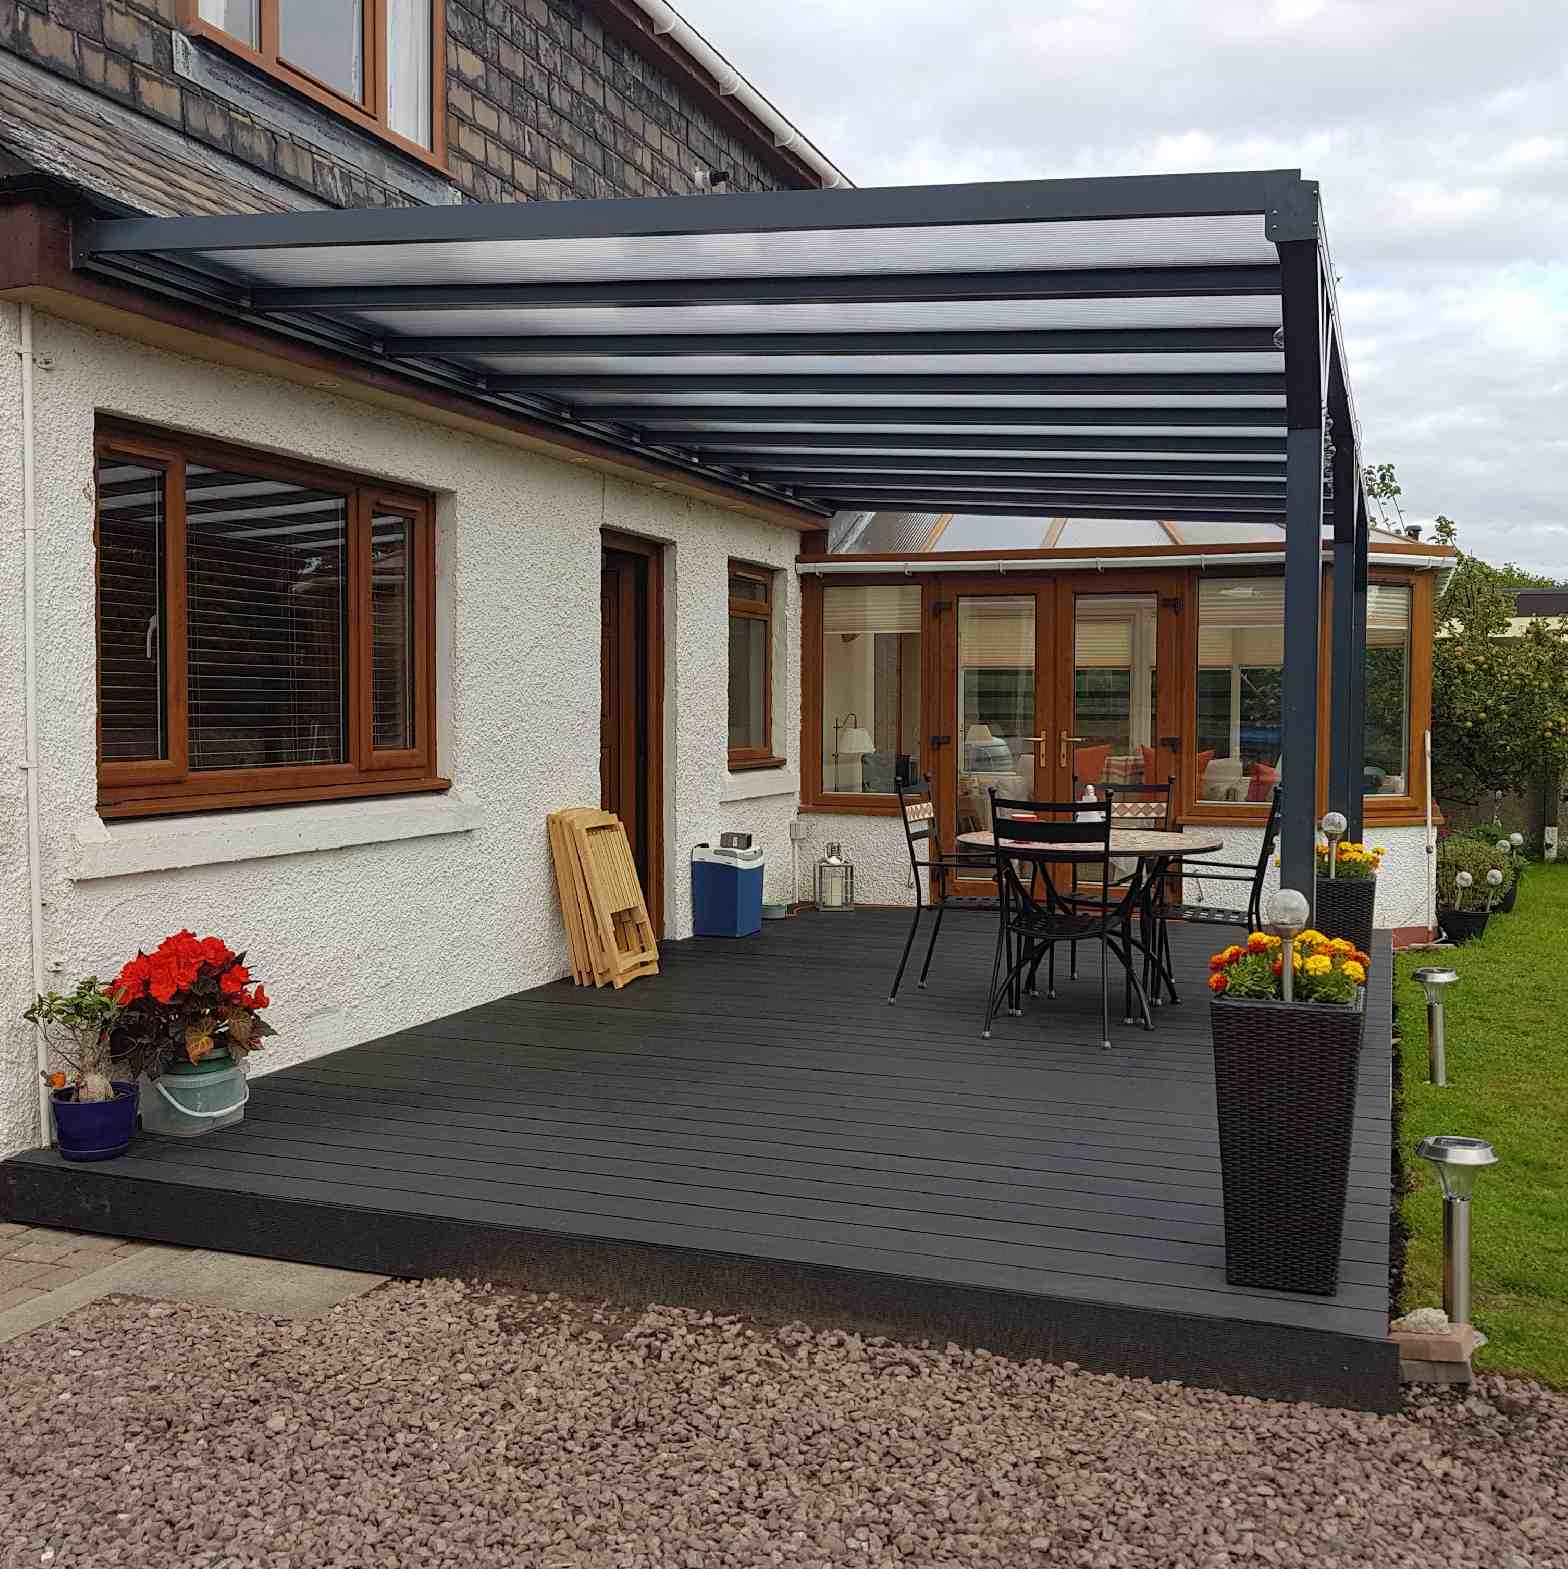 Buy Omega Verandah, Anthracite Grey, 16mm Polycarbonate Glazing - 7.4m (W) x 2.5m (P), (4) Supporting Posts online today